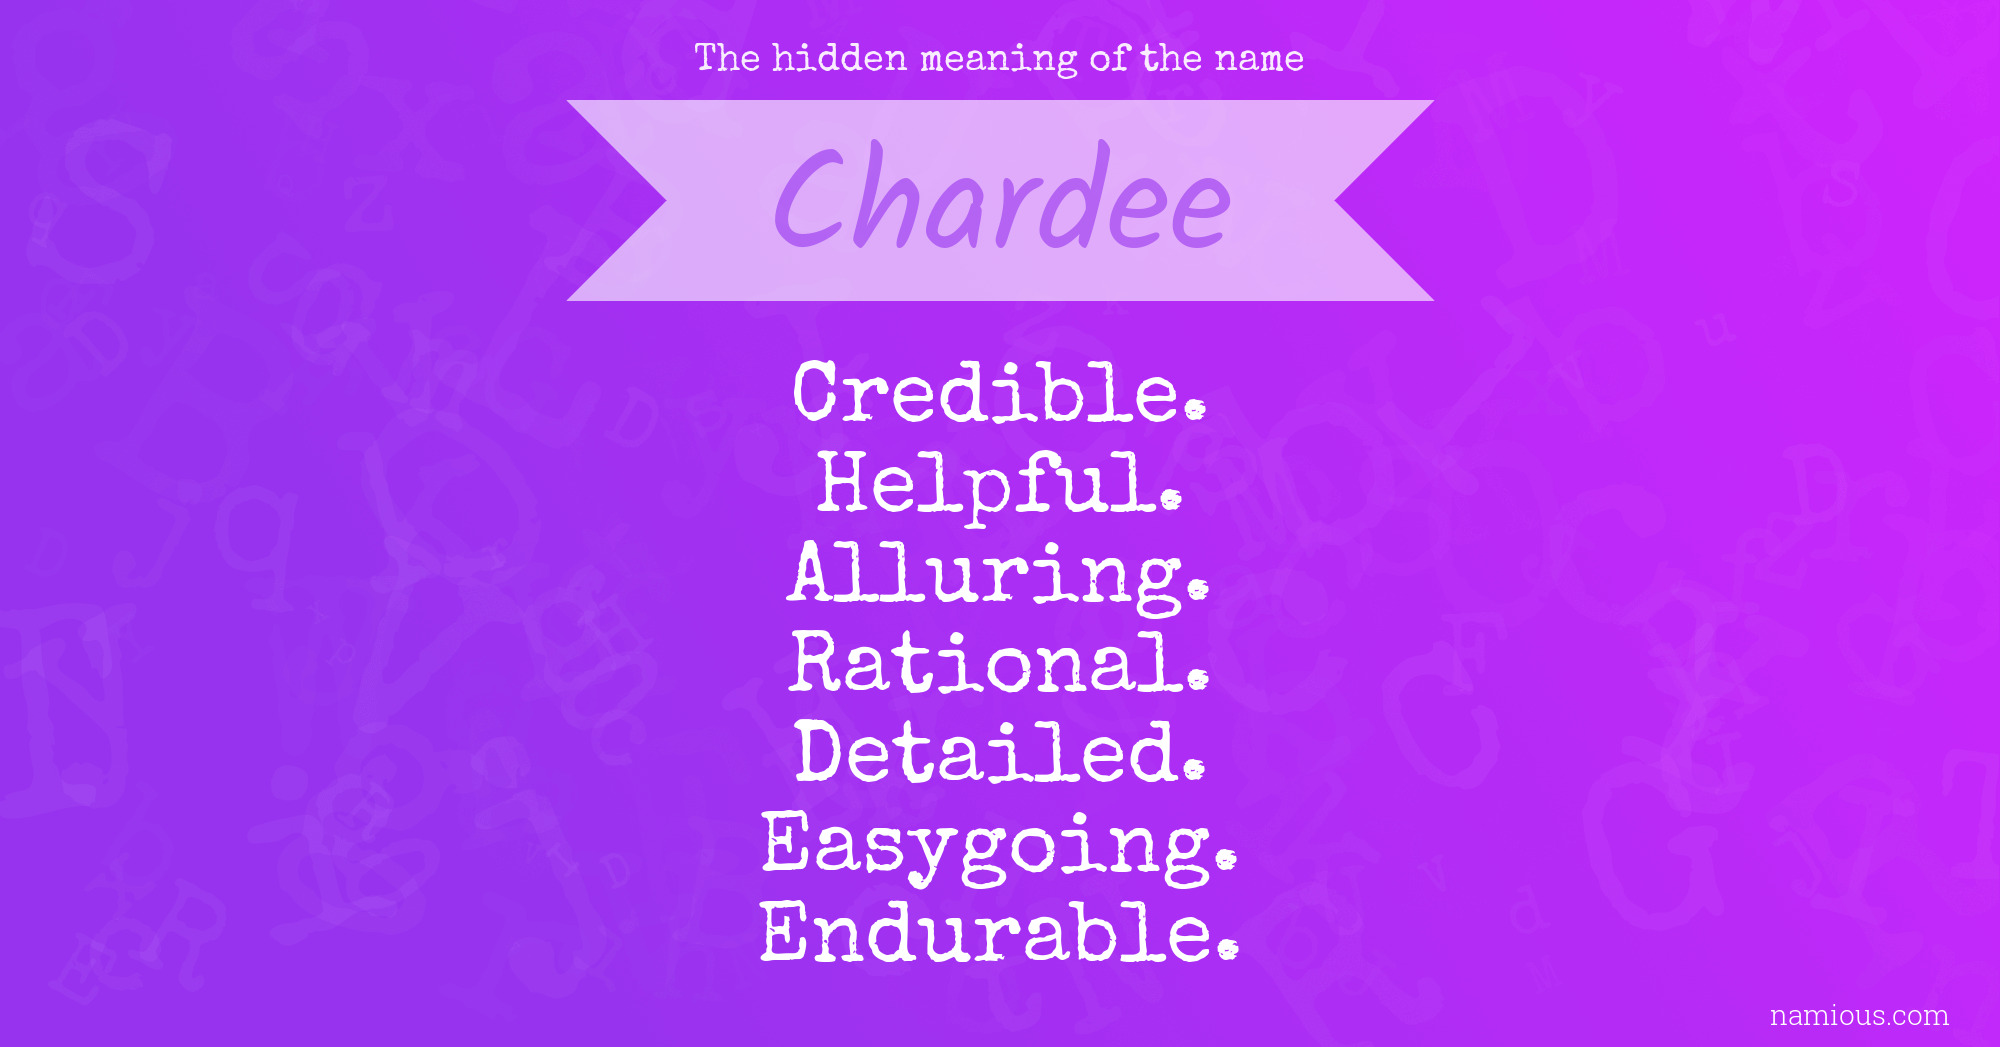 The hidden meaning of the name Chardee